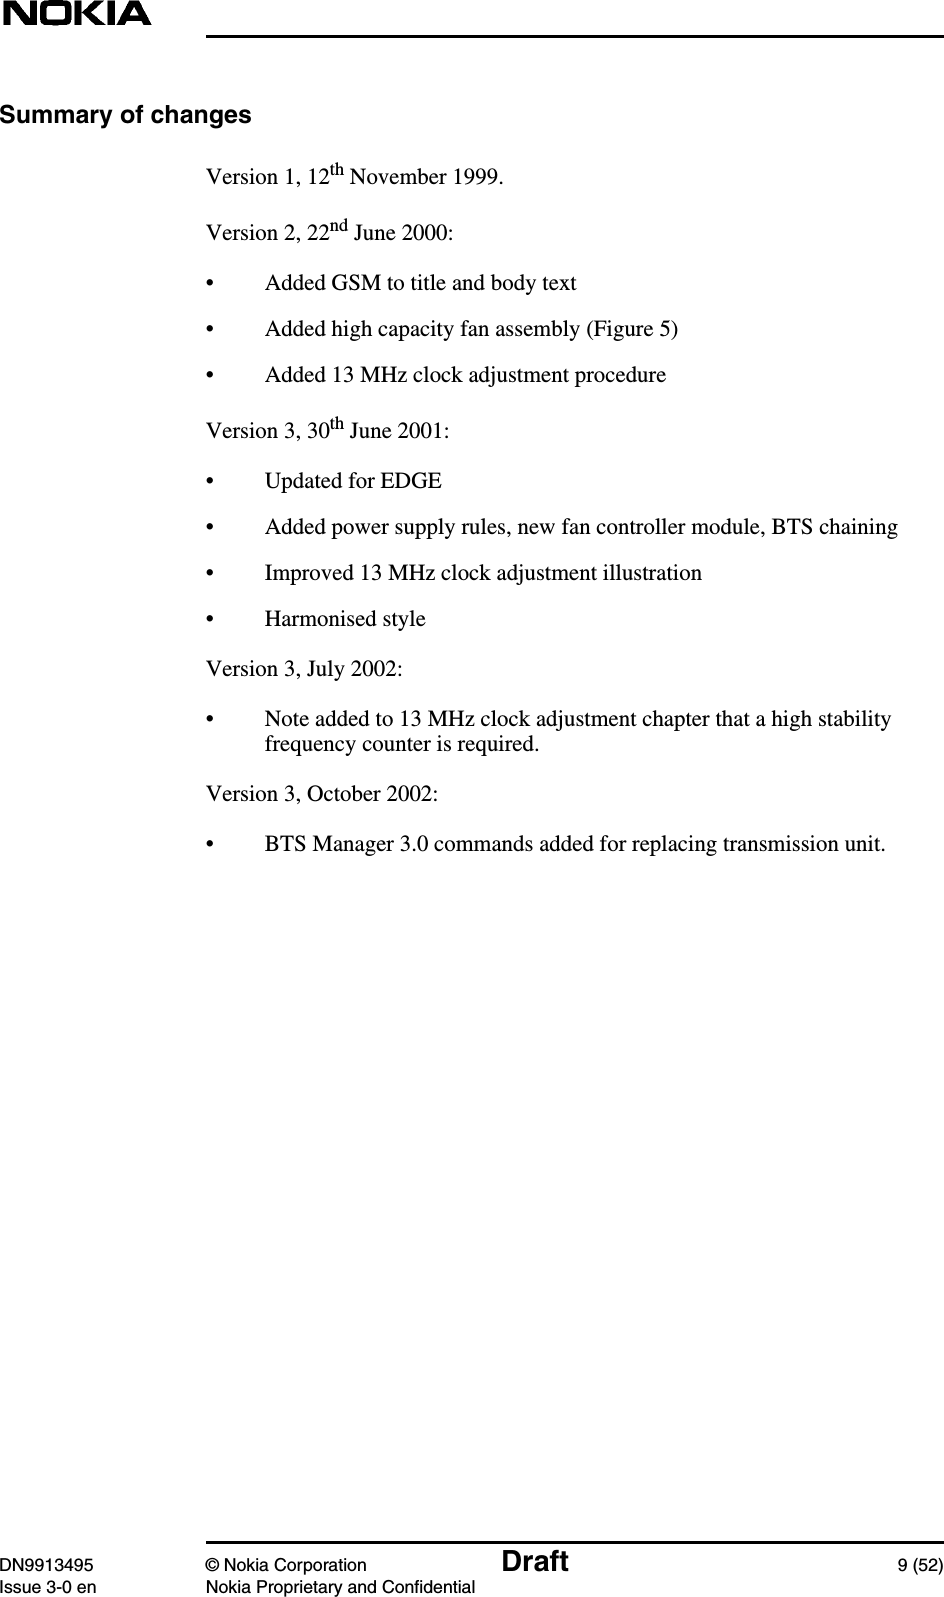 DN9913495 © Nokia Corporation Draft 9 (52)Issue 3-0 en Nokia Proprietary and ConfidentialSummary of changesVersion 1, 12th November 1999.Version 2, 22nd June 2000:• Added GSM to title and body text• Added high capacity fan assembly (Figure 5)• Added 13 MHz clock adjustment procedureVersion 3, 30th June 2001:• Updated for EDGE• Added power supply rules, new fan controller module, BTS chaining• Improved 13 MHz clock adjustment illustration• Harmonised styleVersion 3, July 2002:• Note added to 13 MHz clock adjustment chapter that a high stabilityfrequency counter is required.Version 3, October 2002:• BTS Manager 3.0 commands added for replacing transmission unit.